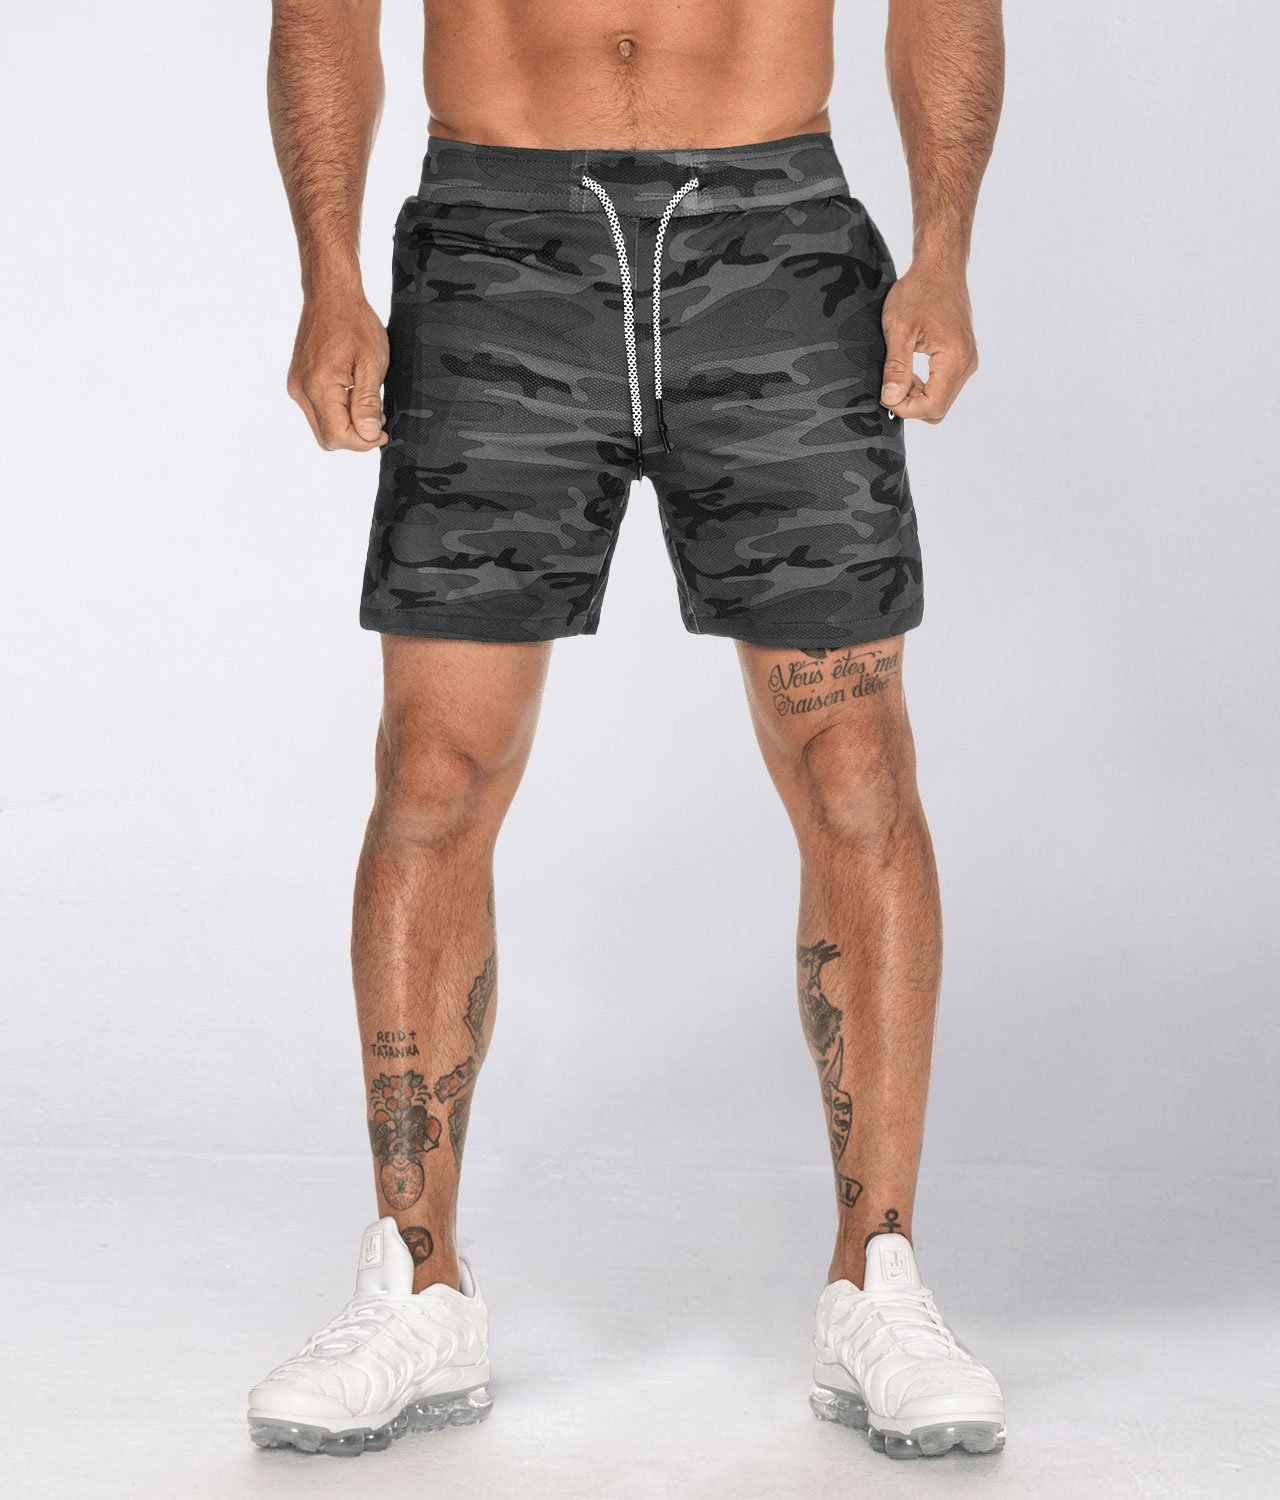 Born Tough Air Pro™ Men's 2 in 1 Black Gym Workout Shorts With